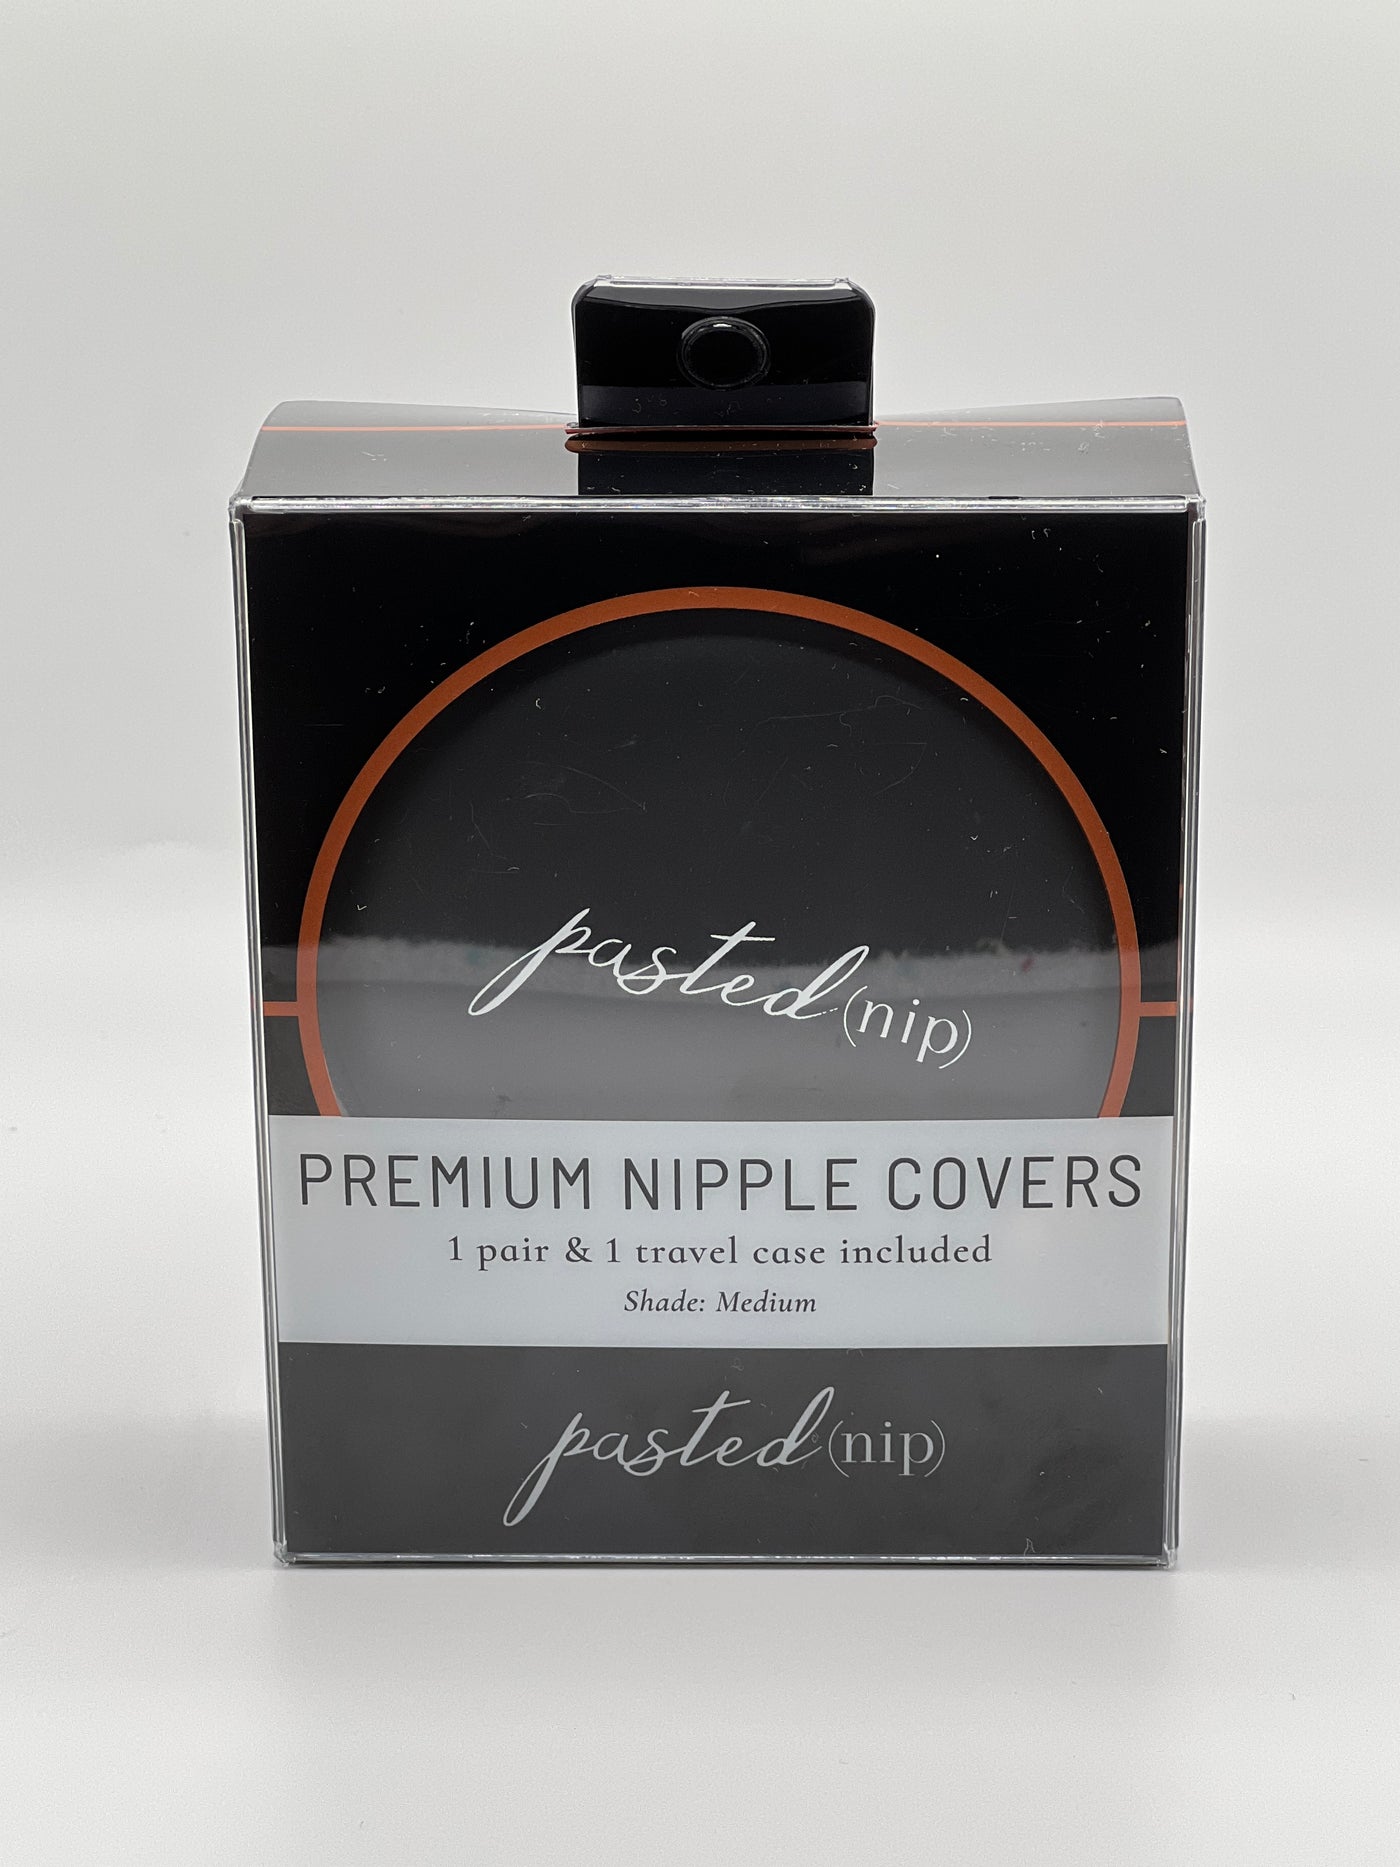 Premium Nipple Covers by Pasted Nip